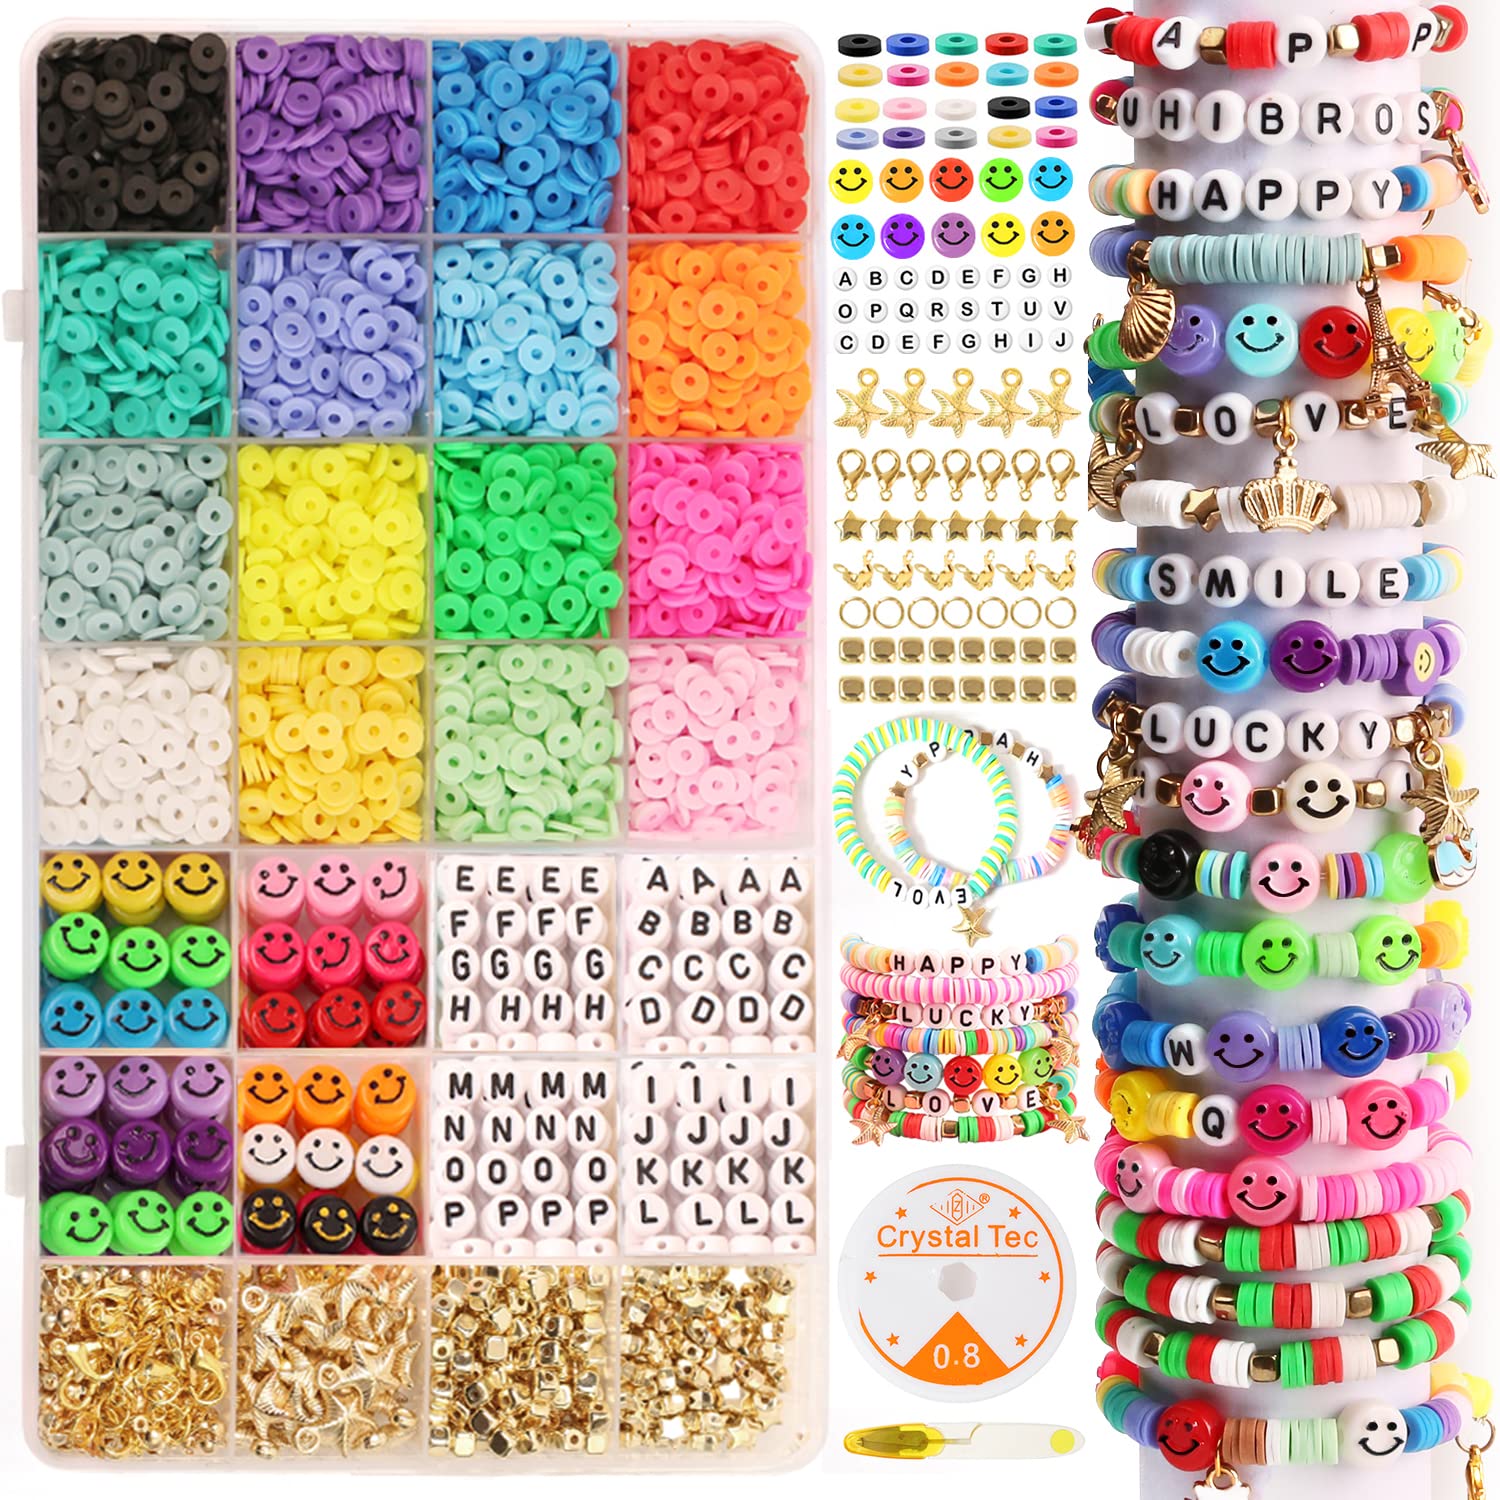 Colorful Bone Beads Jewelry Making Kit with Free Necklace